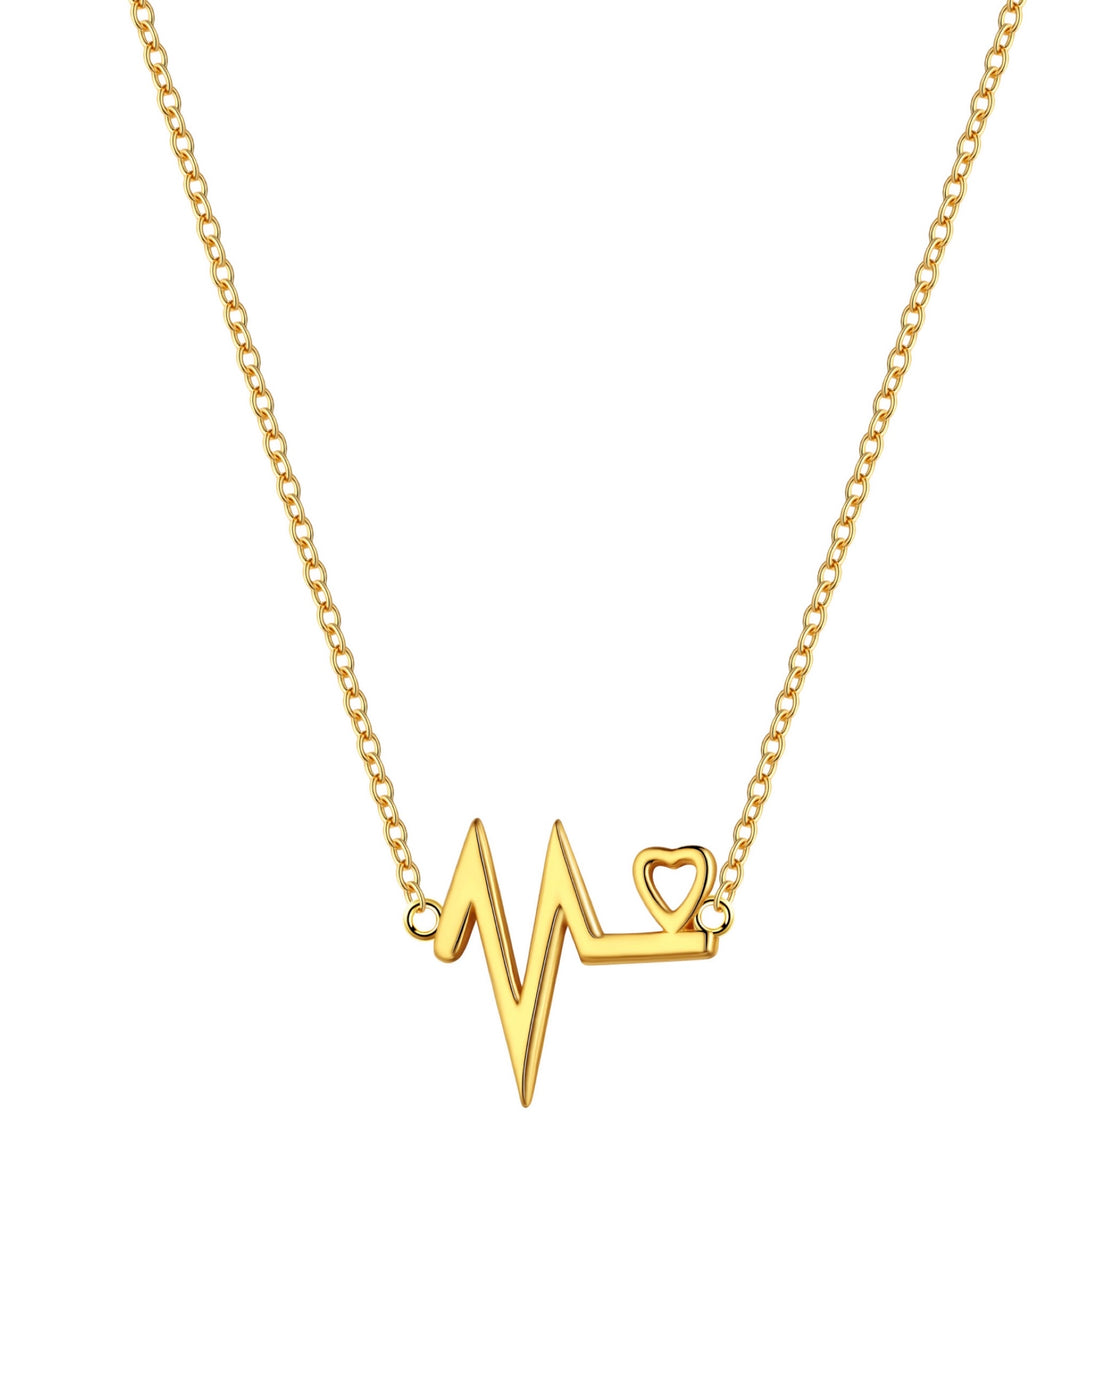 Darla Necklace | 18k Gold Plated